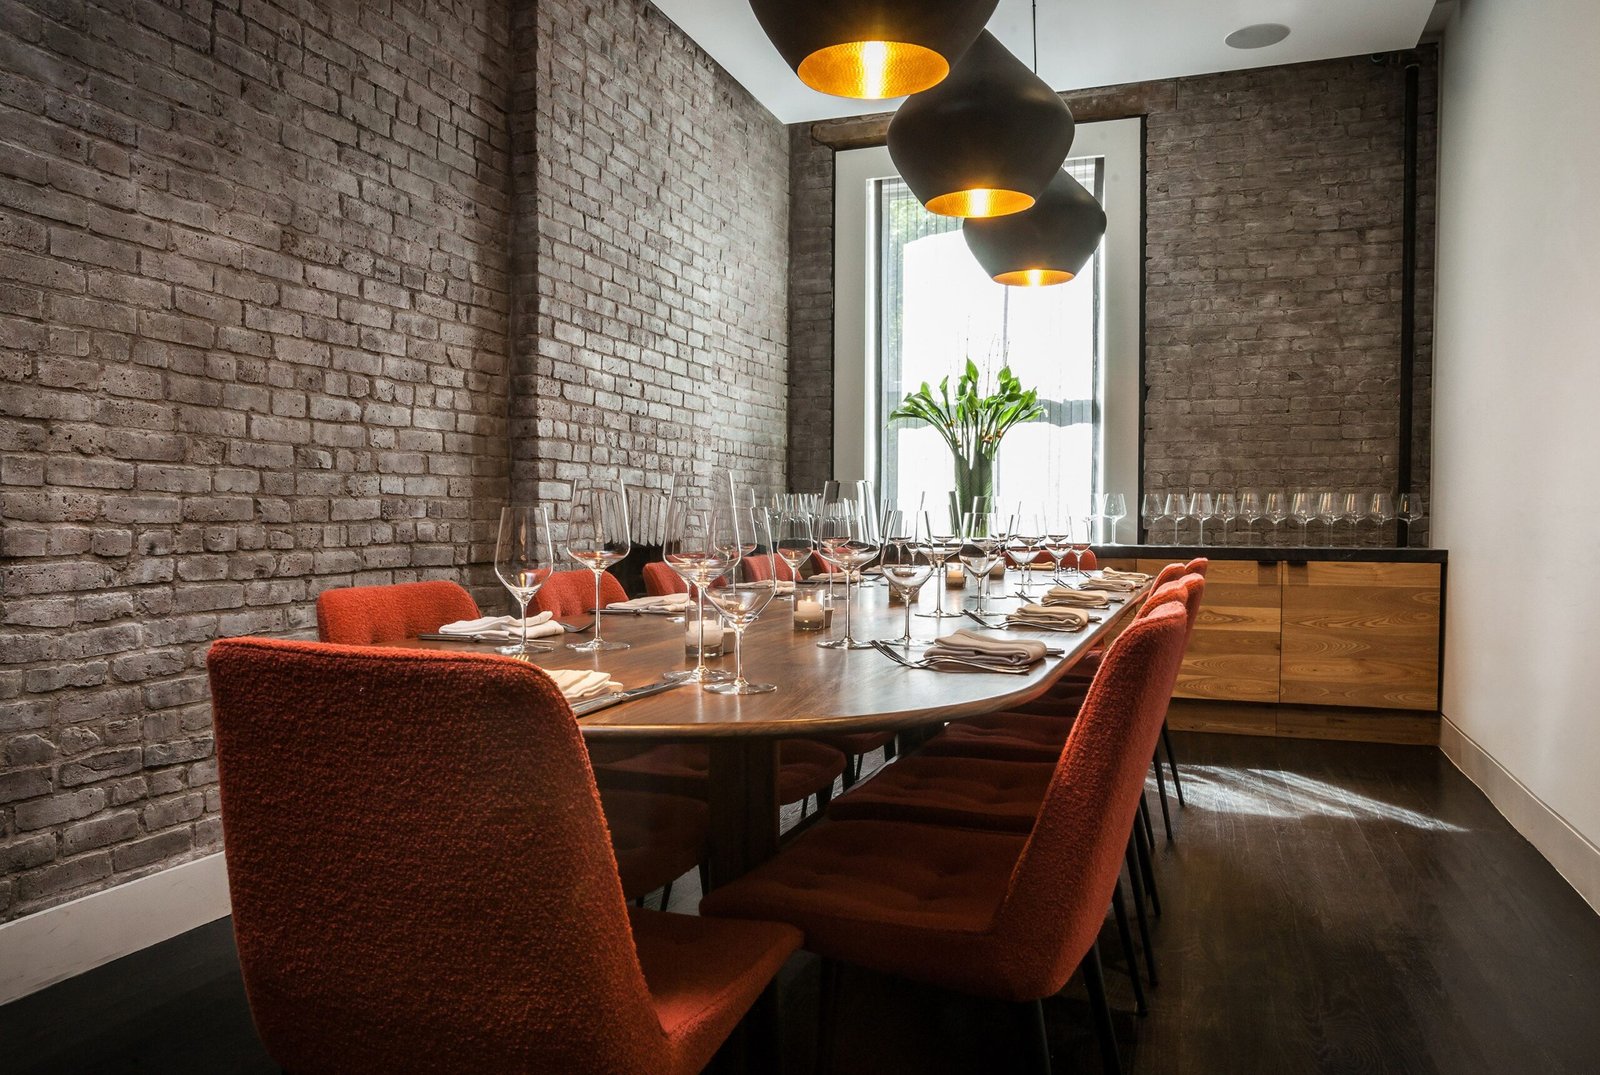 Why Private Dining Rooms Are The Perfect Choice For Intimate Gatherings?